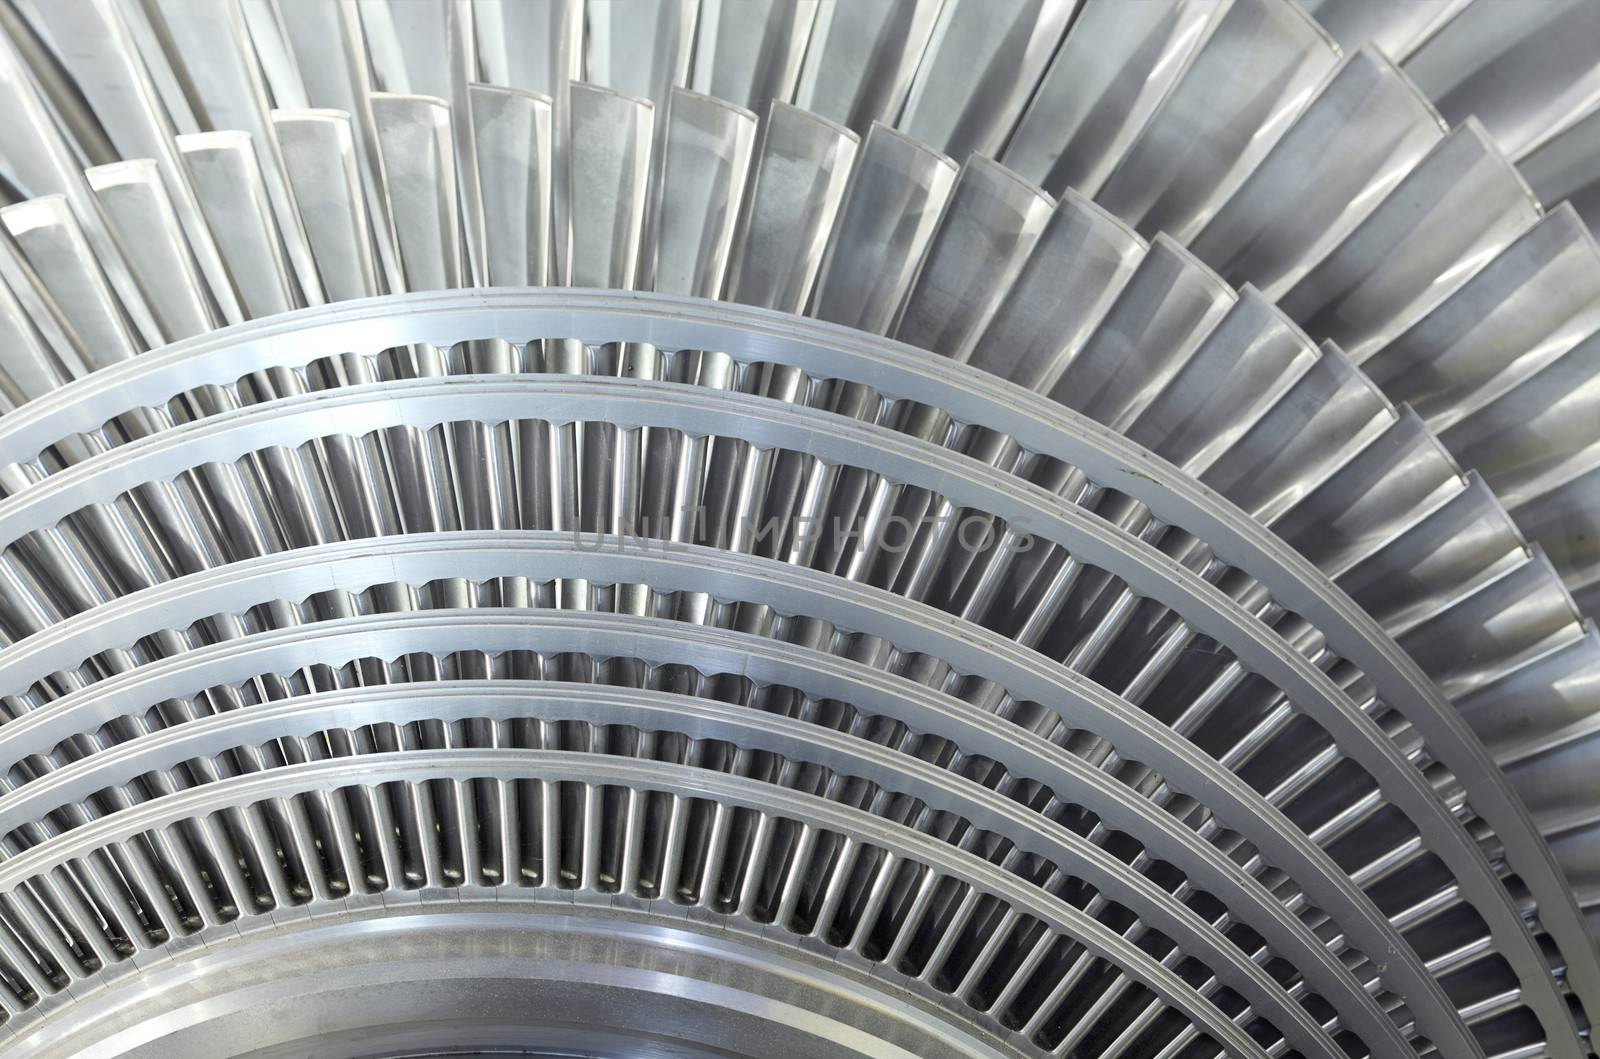 Close up of internal rotor of a steam Turbine